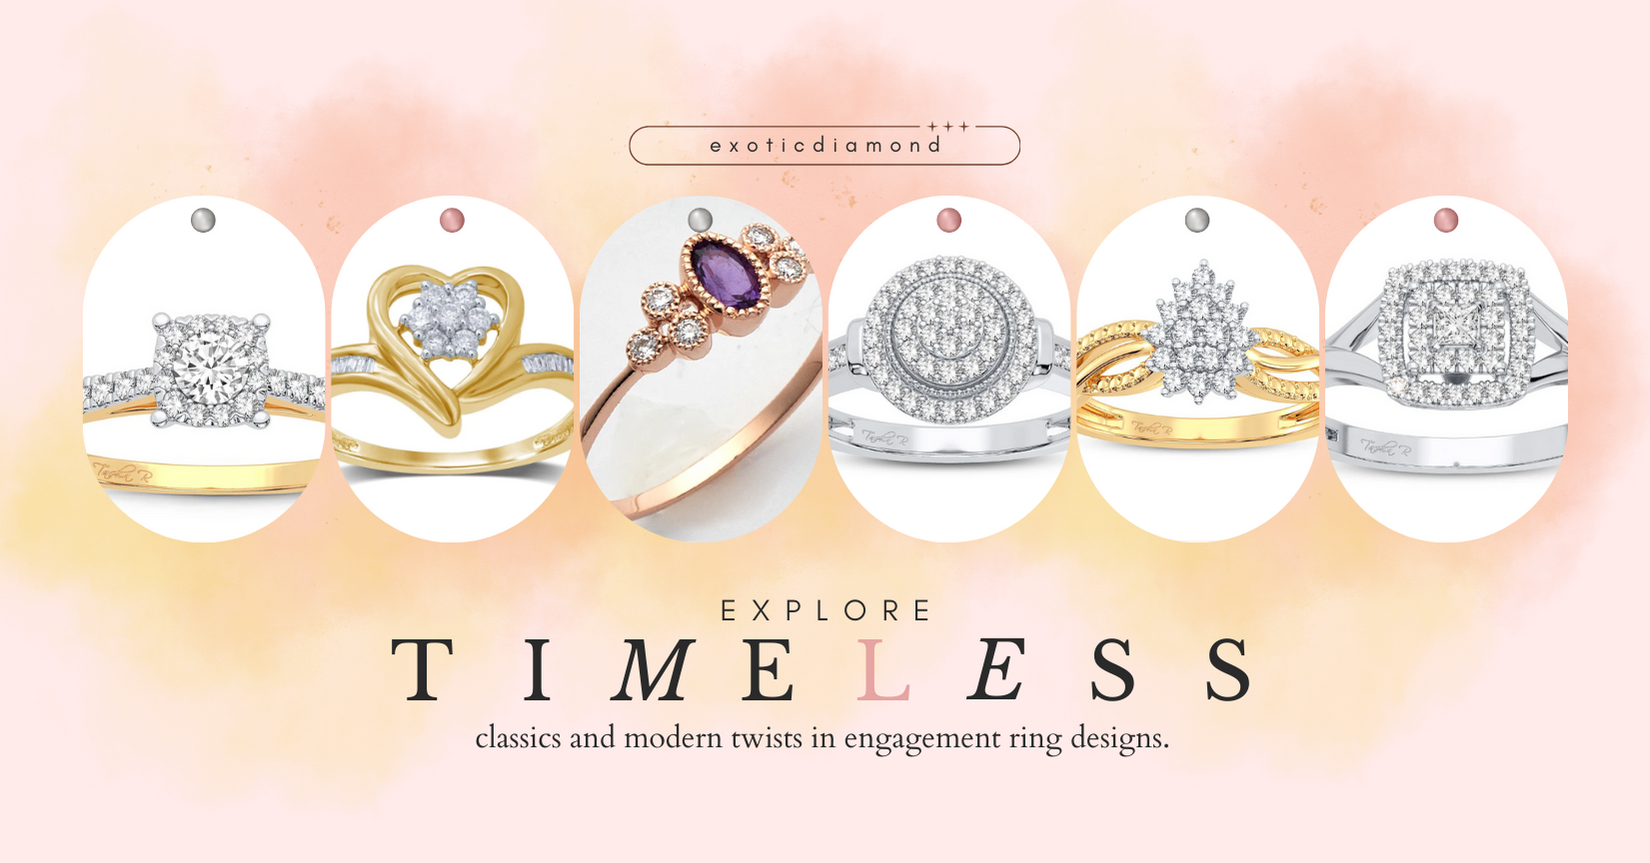 Explore Time Less Classics And Modern Twists In Engagement Ring Designs.